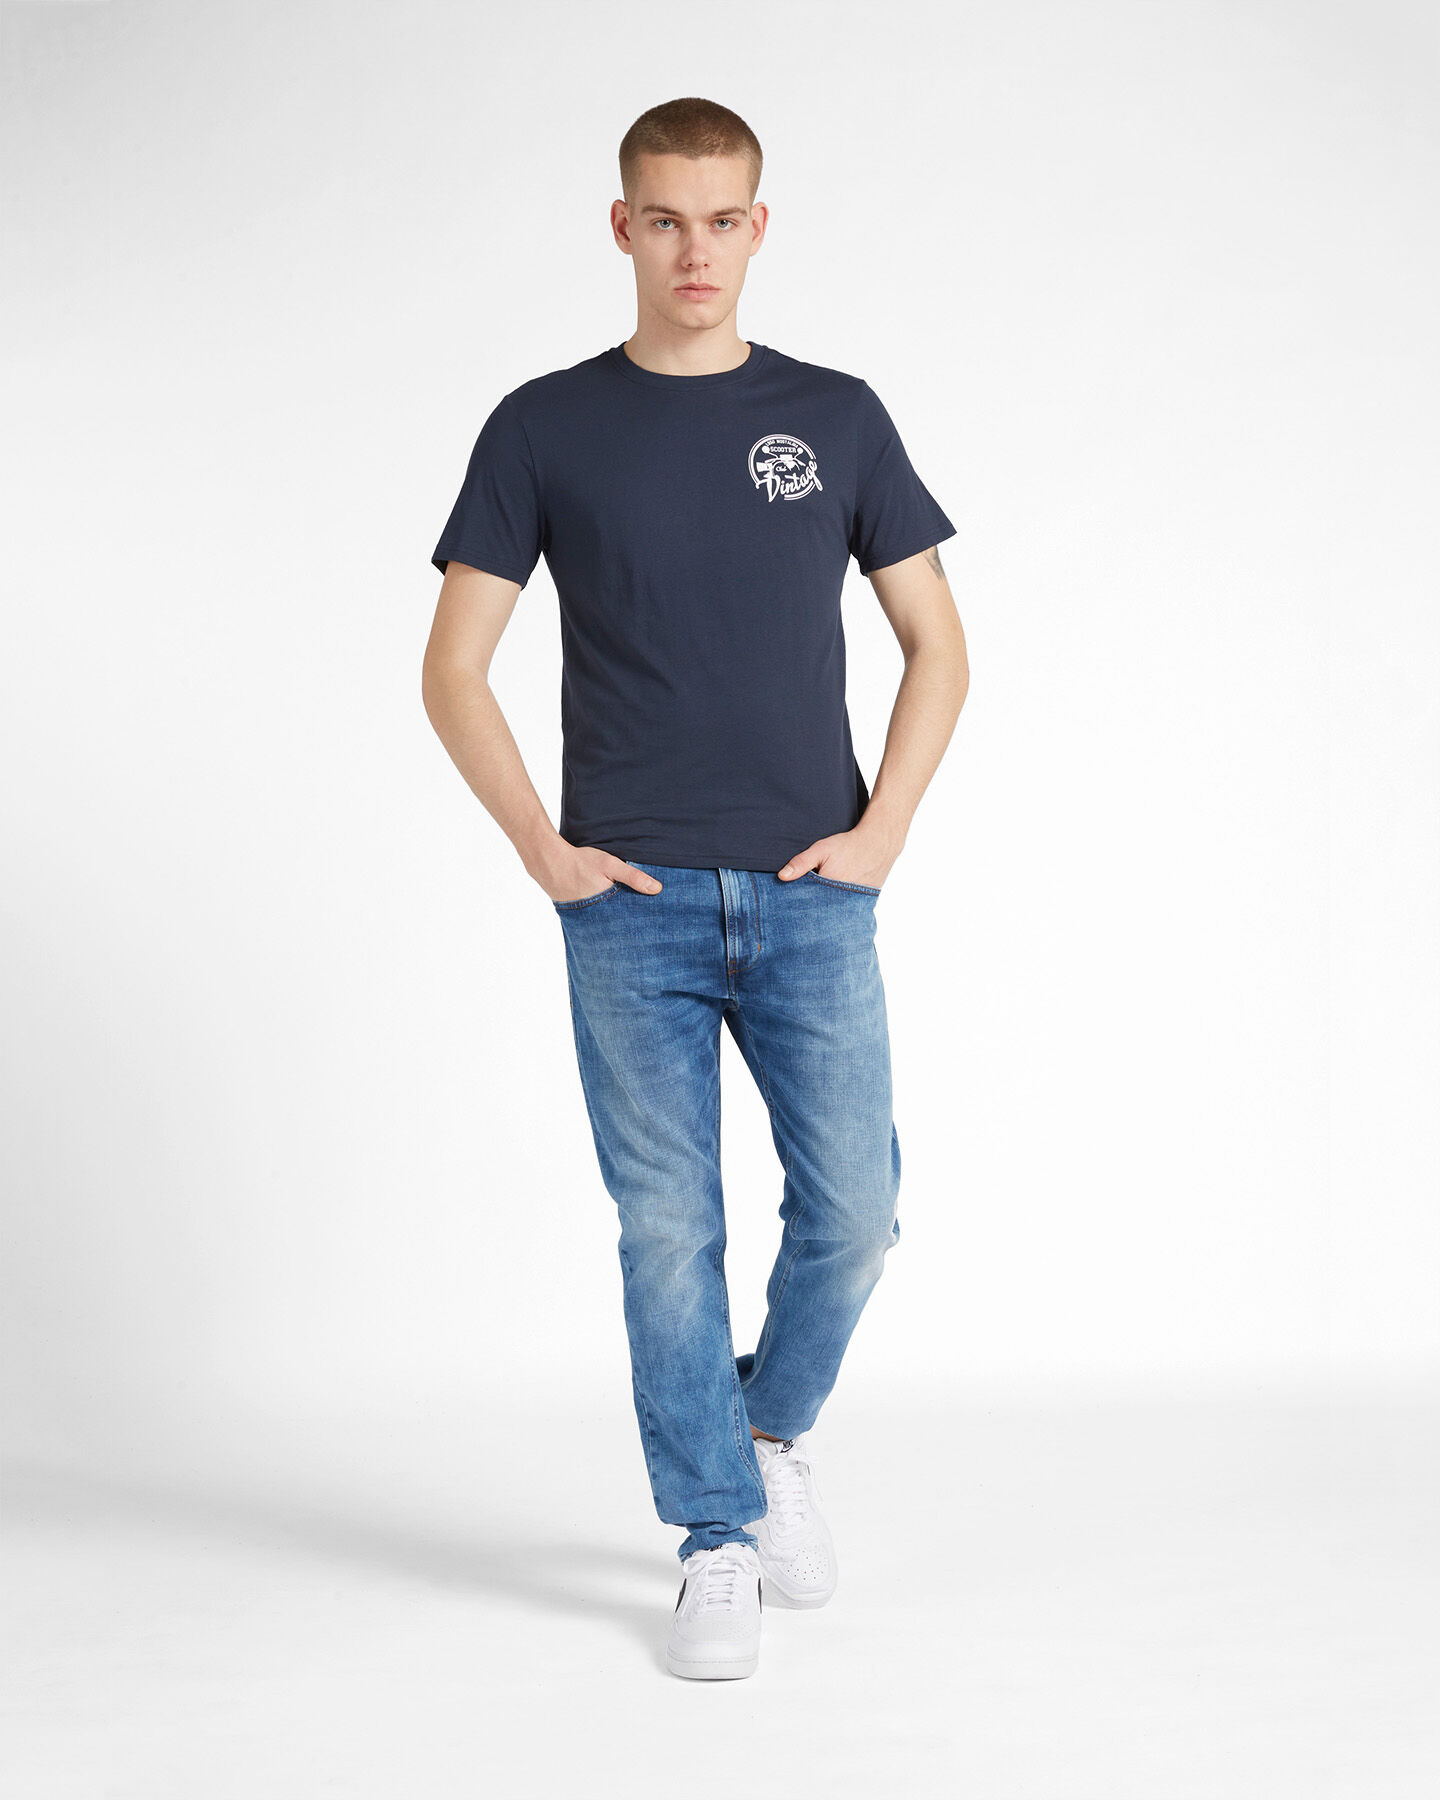  T-Shirt DACK'S BASIC COLLECTION M S4118351|1125|XS scatto 1